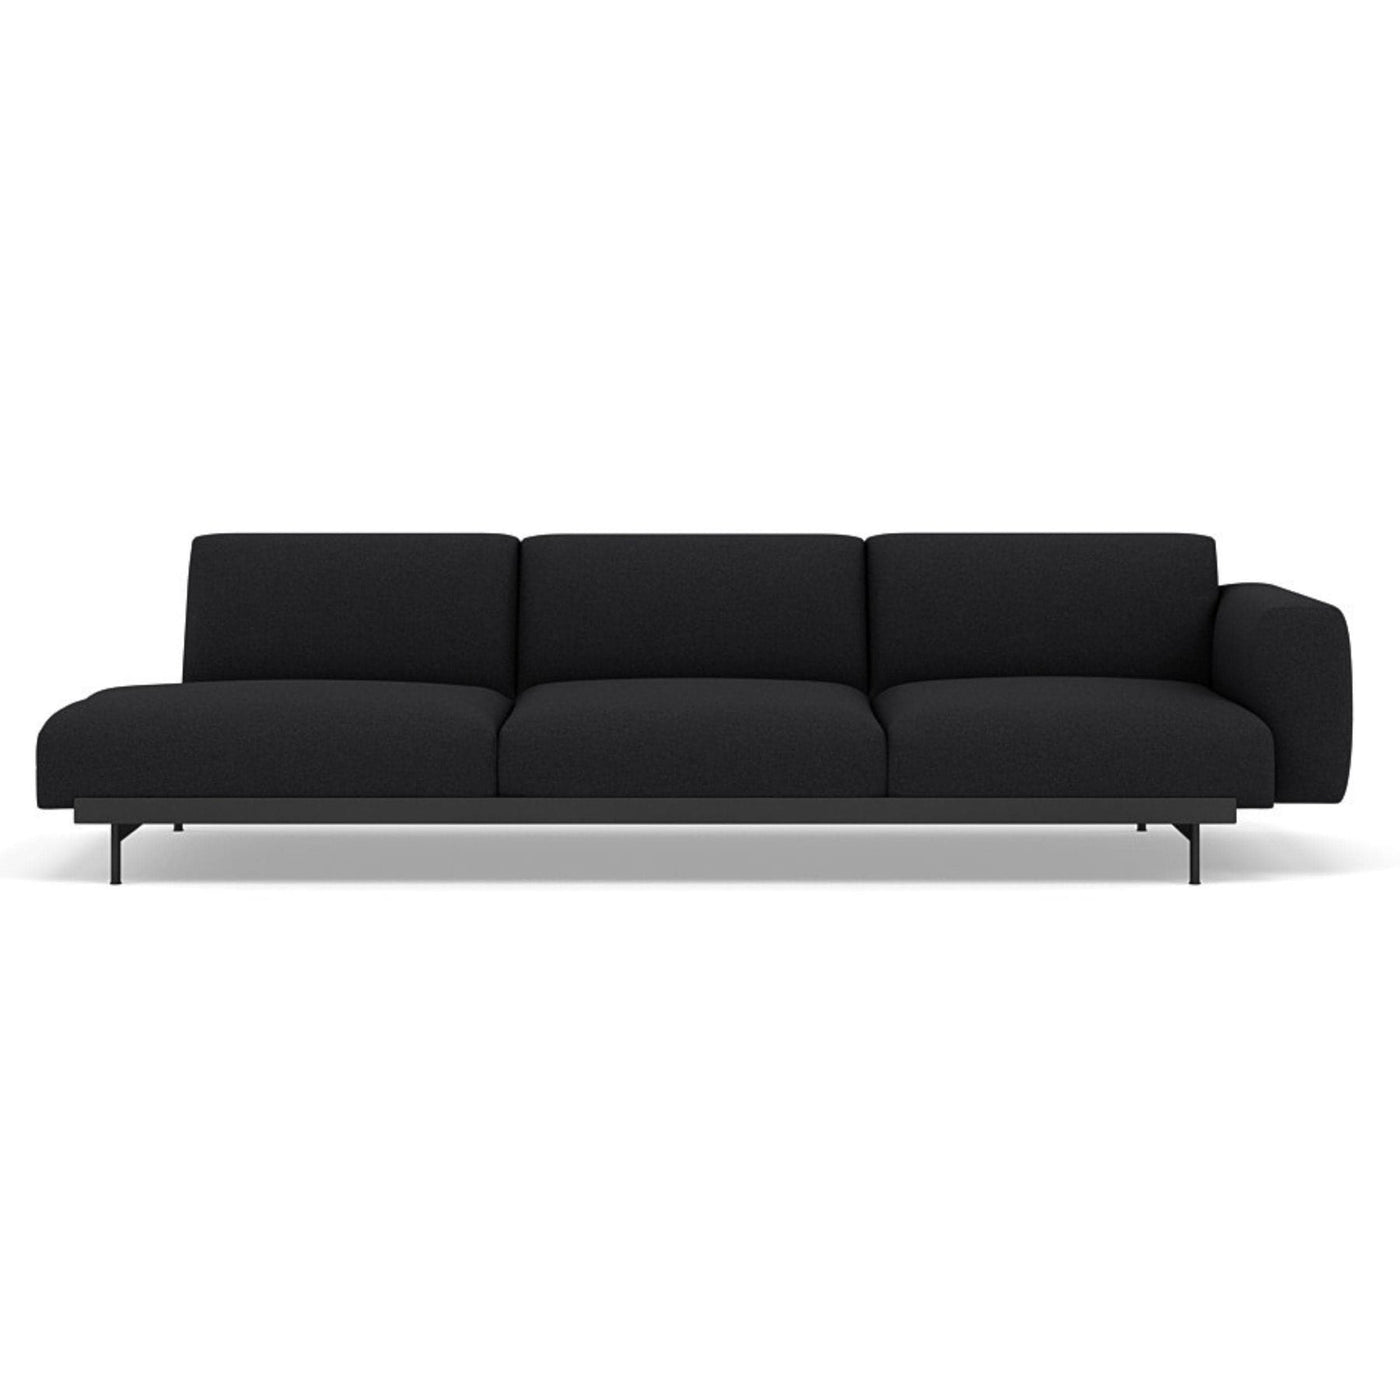 Muuto In Situ Modular 3 Seater Sofa, configuration 2. Made to order from someday designs. #colour_divina-md-193